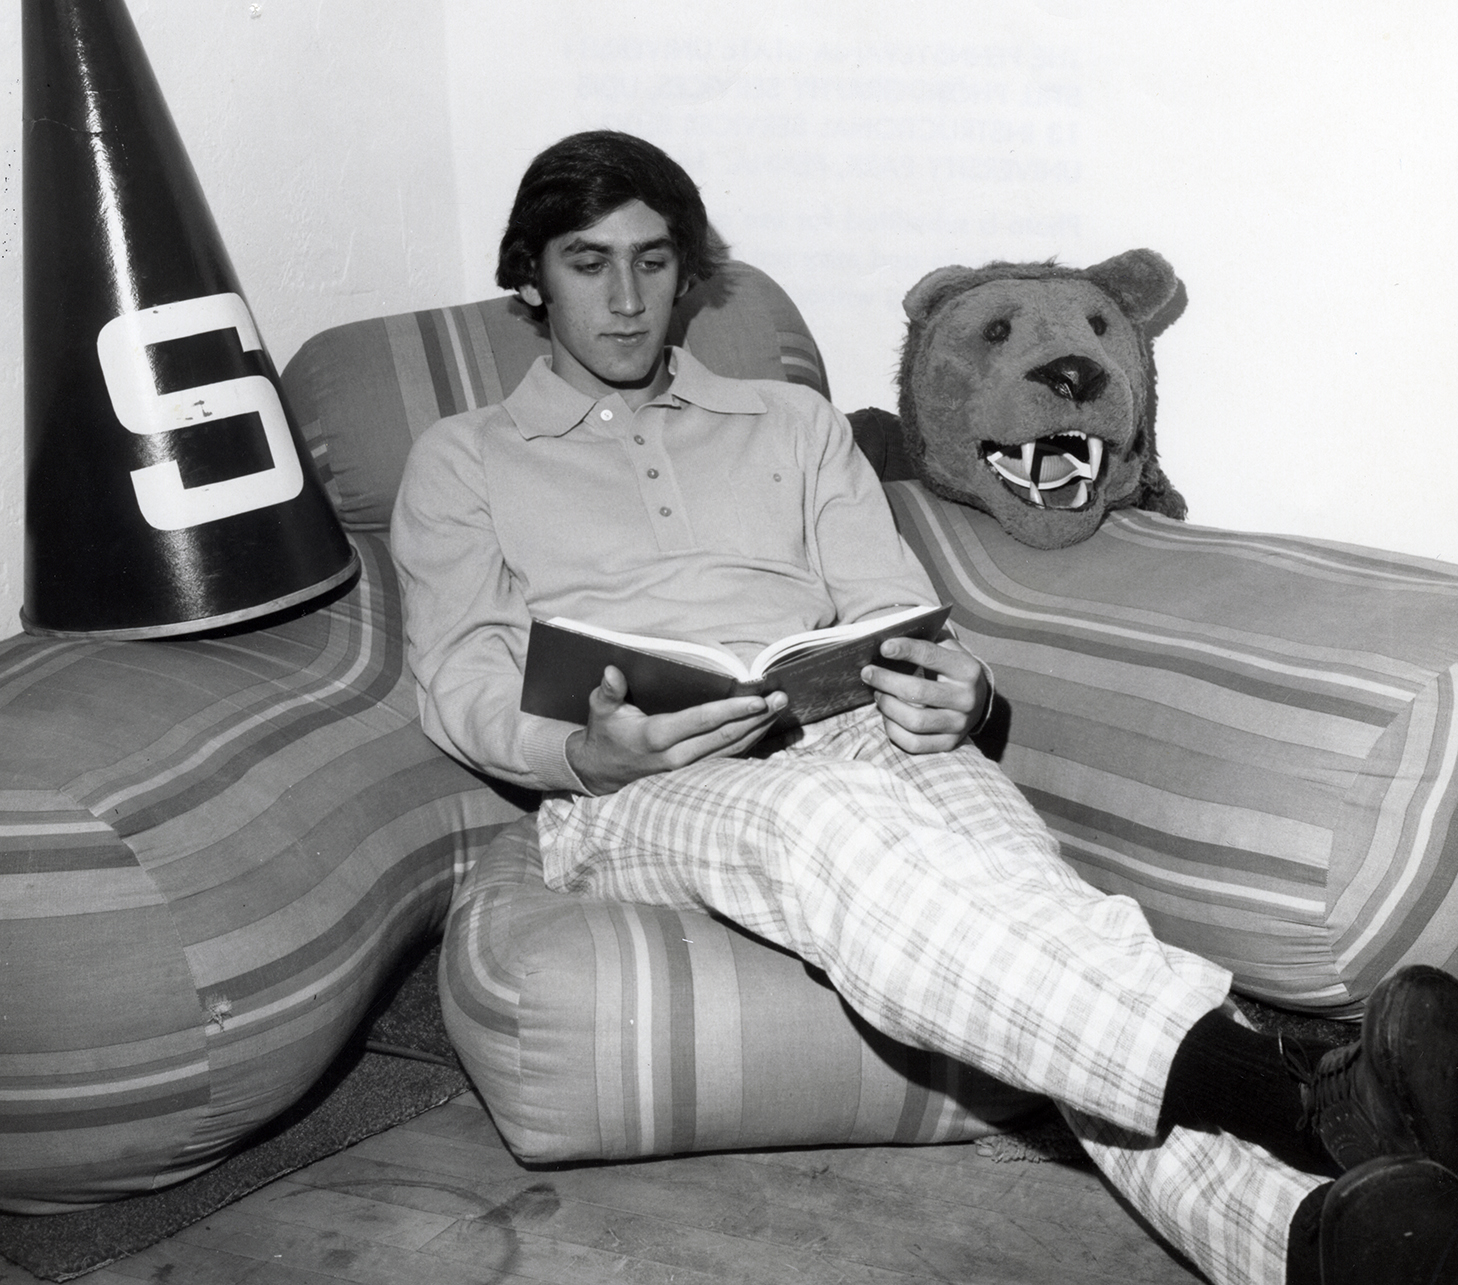 Andy Bailey '77 Sci with the Nittany Lion suit, courtesy Penn State